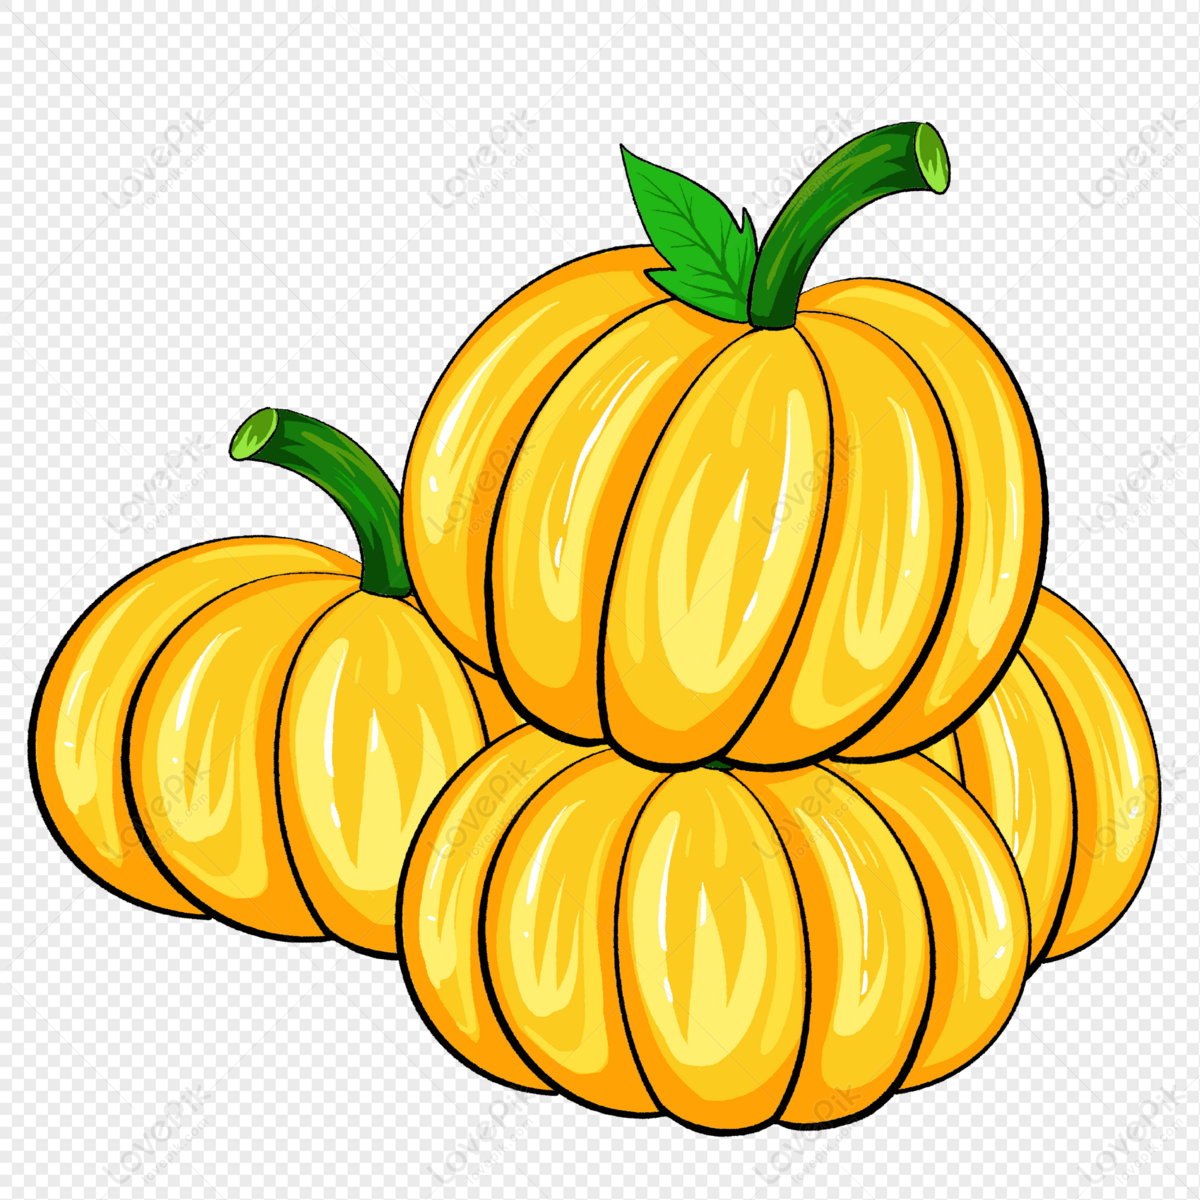 Cartoon Yellow Pumpkin PNG White Transparent And Clipart Image For Free  Download - Lovepik | 401531242